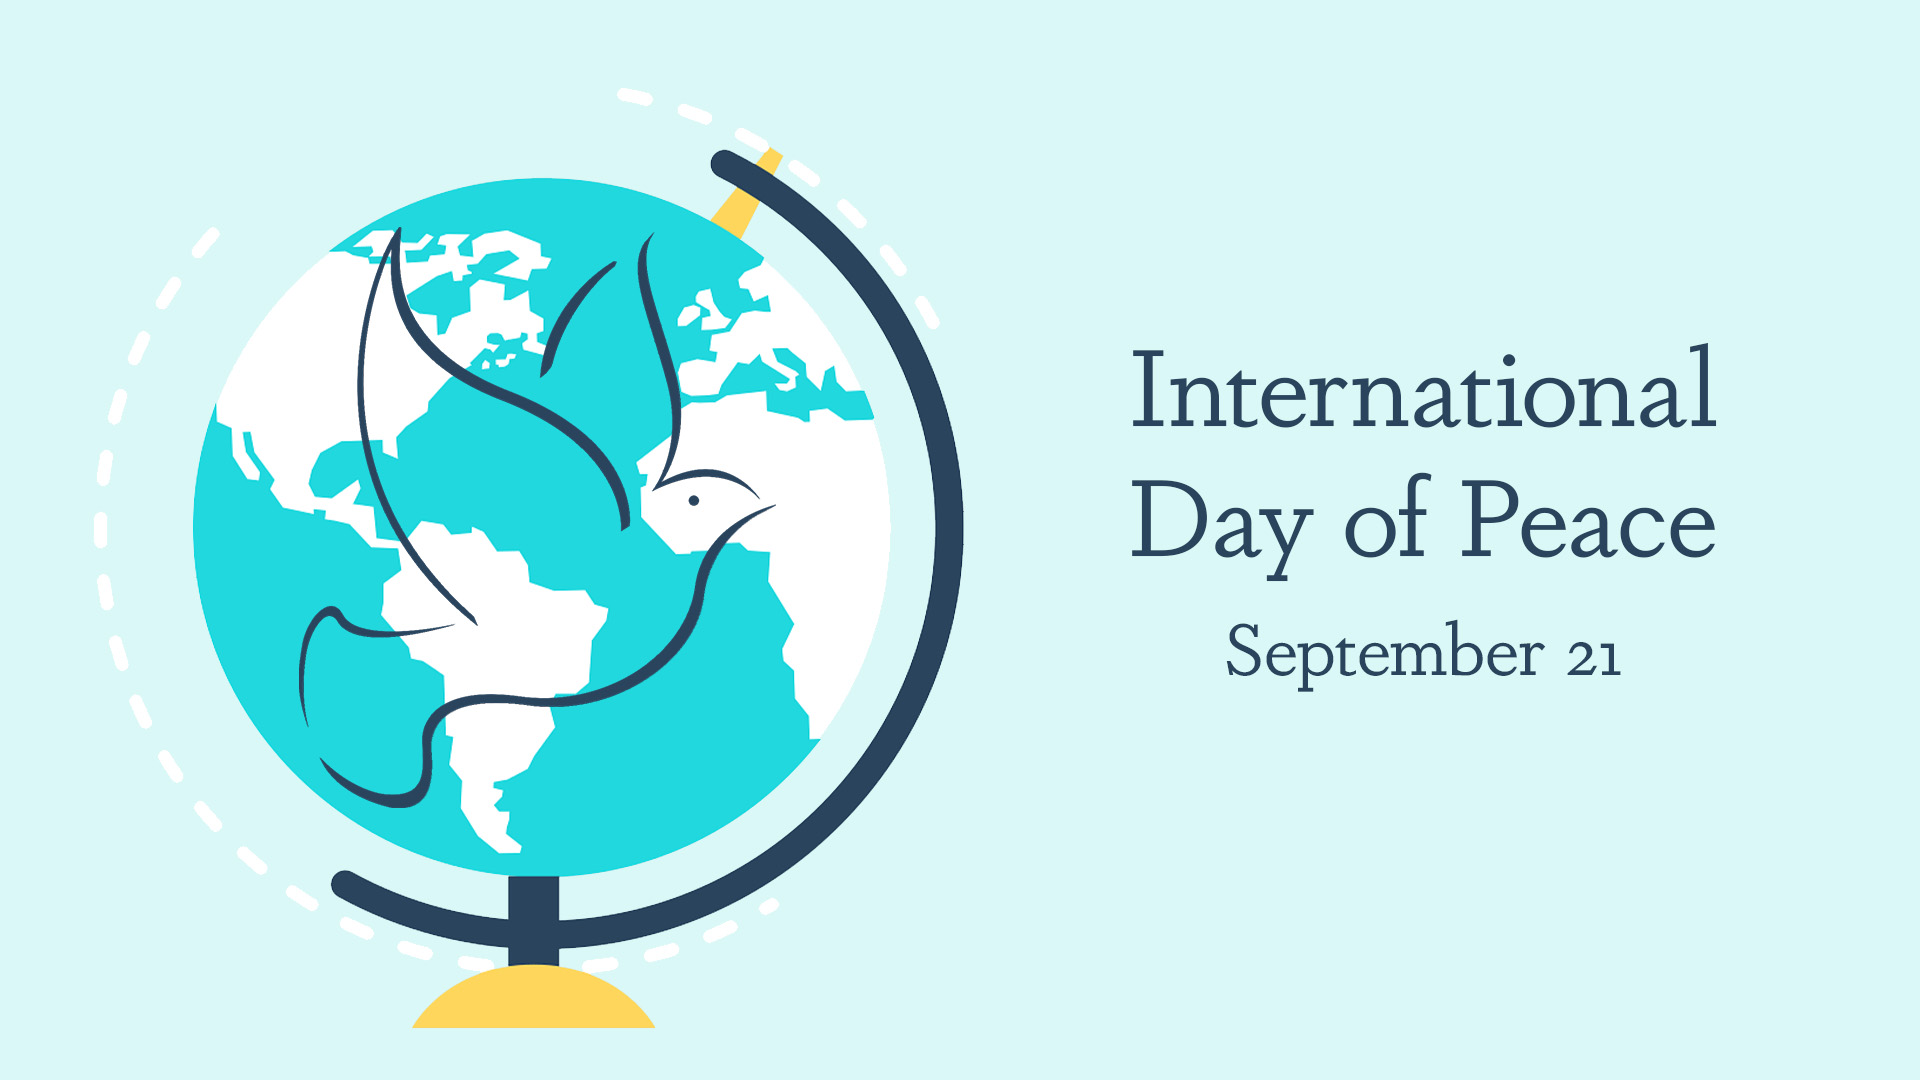 Light blue background. Center right of the image reads International Day of Peace September 21 in a serif font with navy letters centered aligned. On the left a teal and white globe with a navy and gold stand is overlapped with an outline of a dove in navy lines. A white dashed-line circle surrounds the globe.